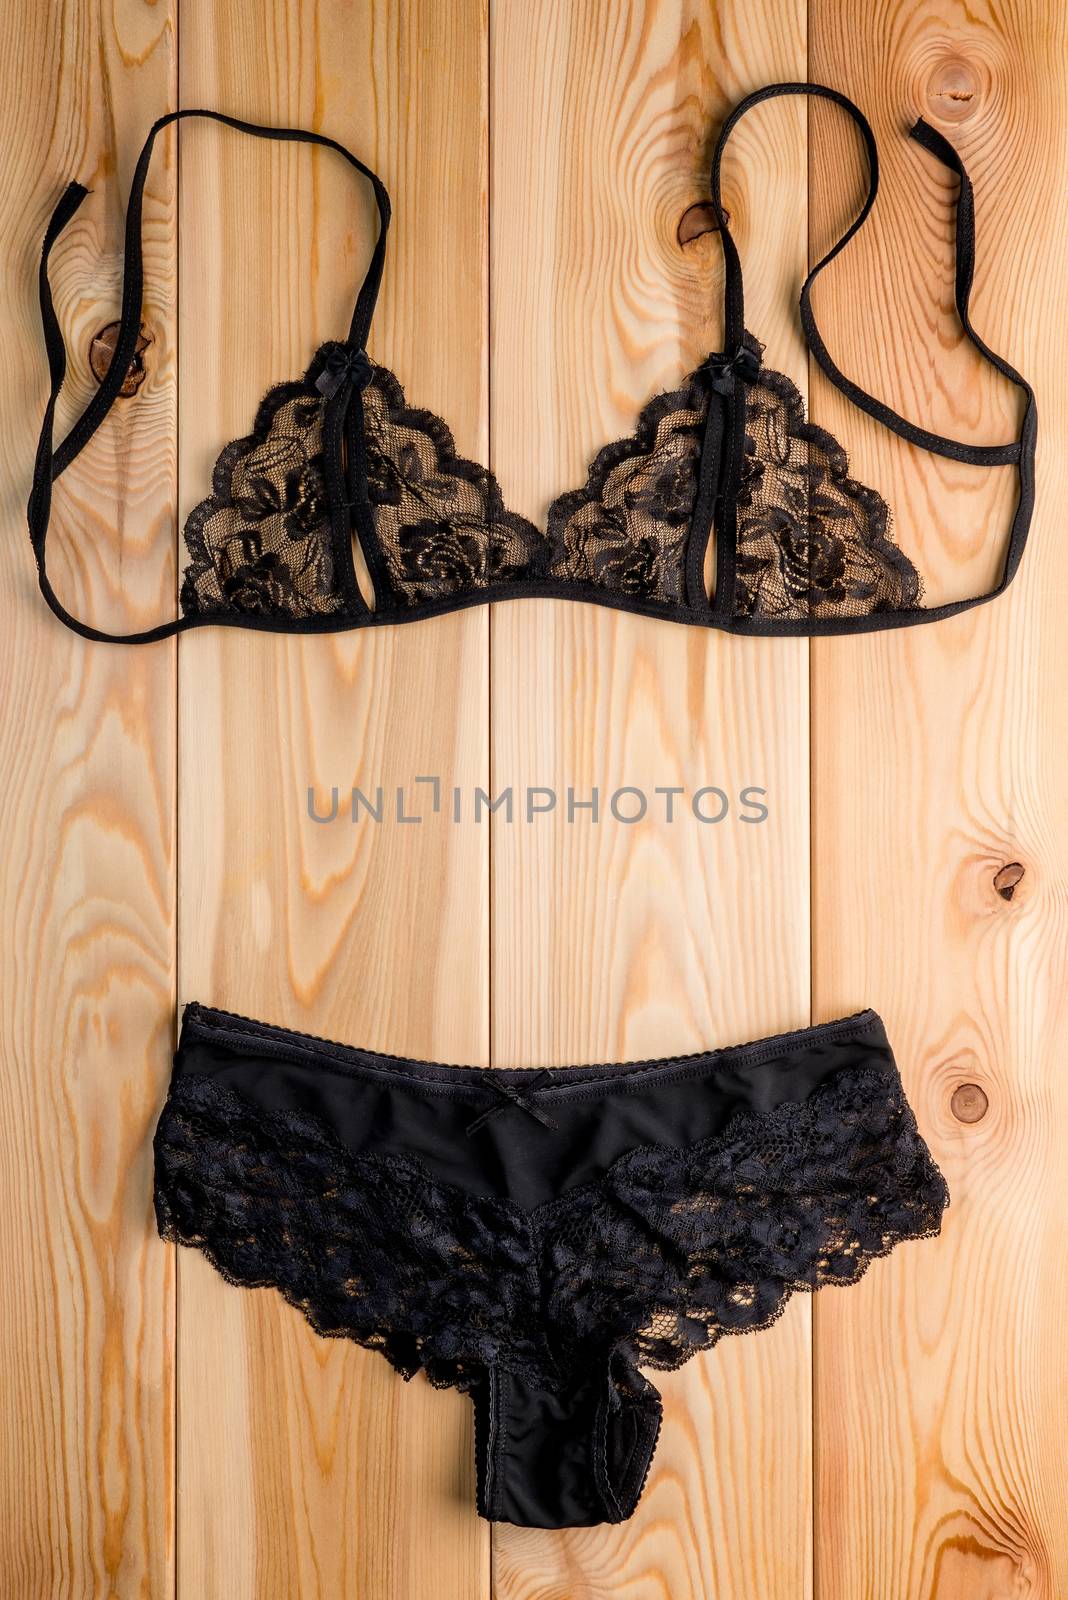 Sets of sexy lace lingerie to seduce on the wooden floor by kosmsos111